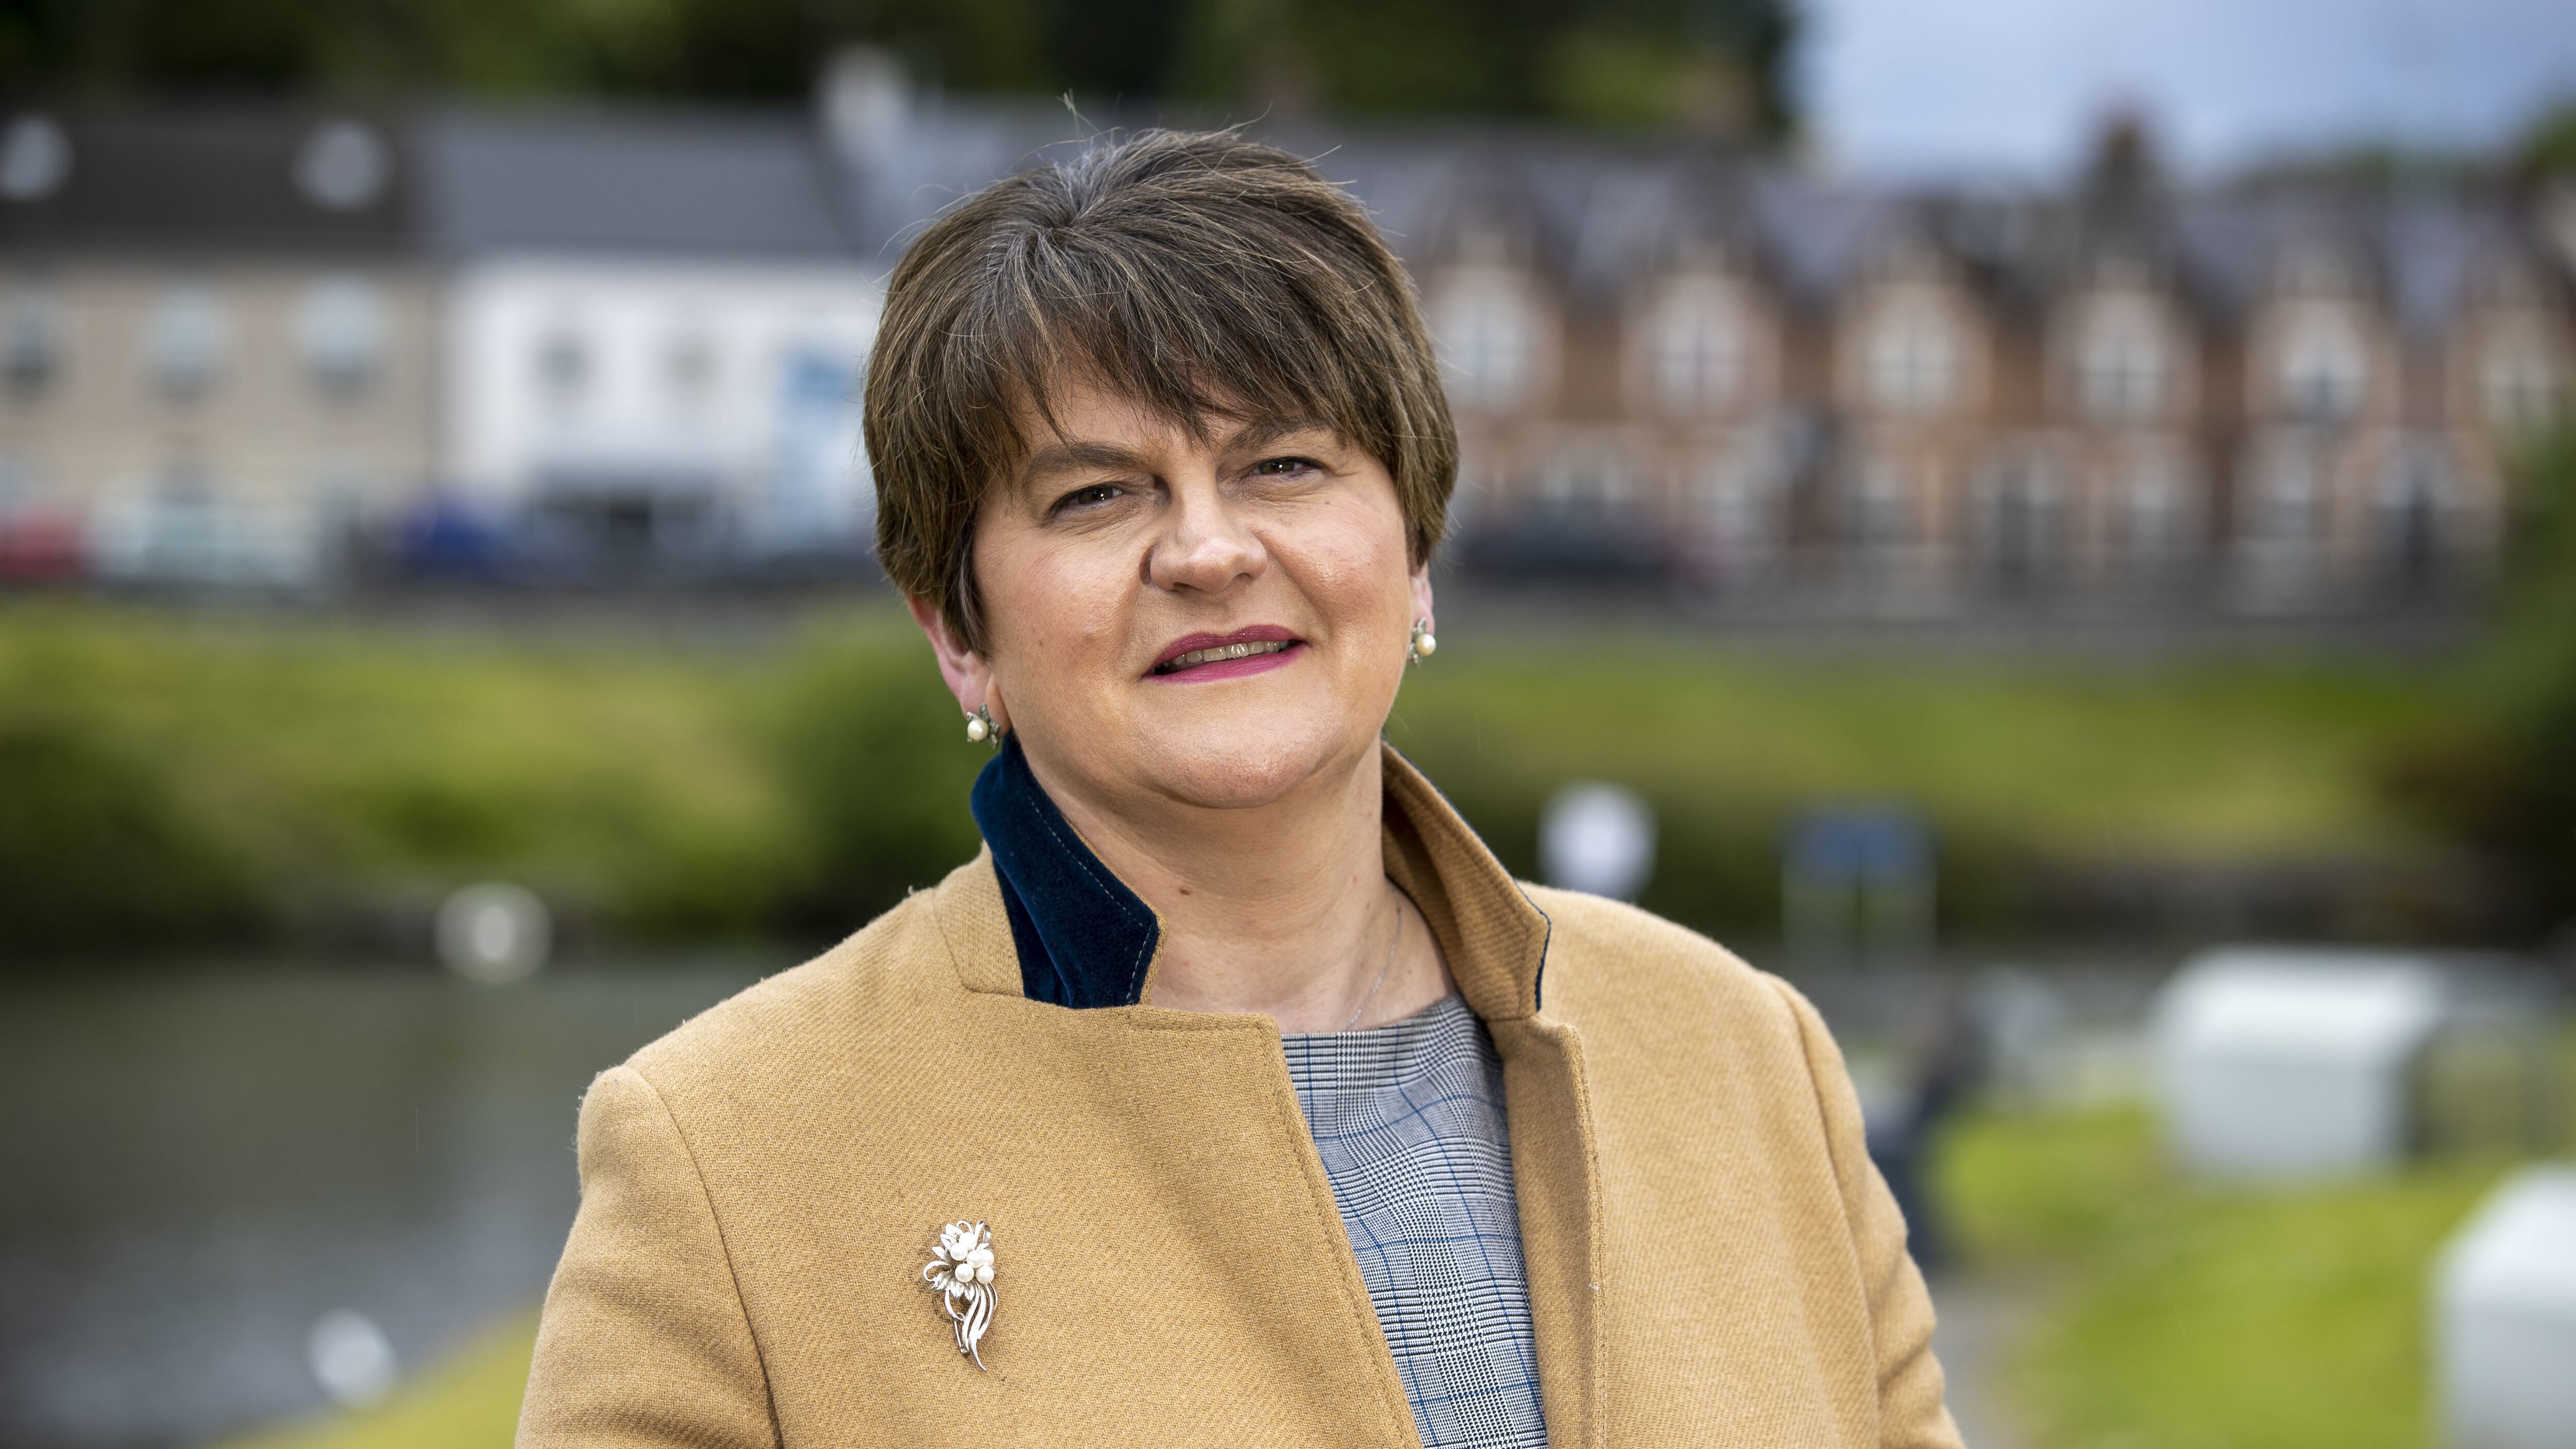 Arlene Foster, former first minister of Northern Ireland and former leader of the DUP, has been giving evidence to the Covid-19 inquiry